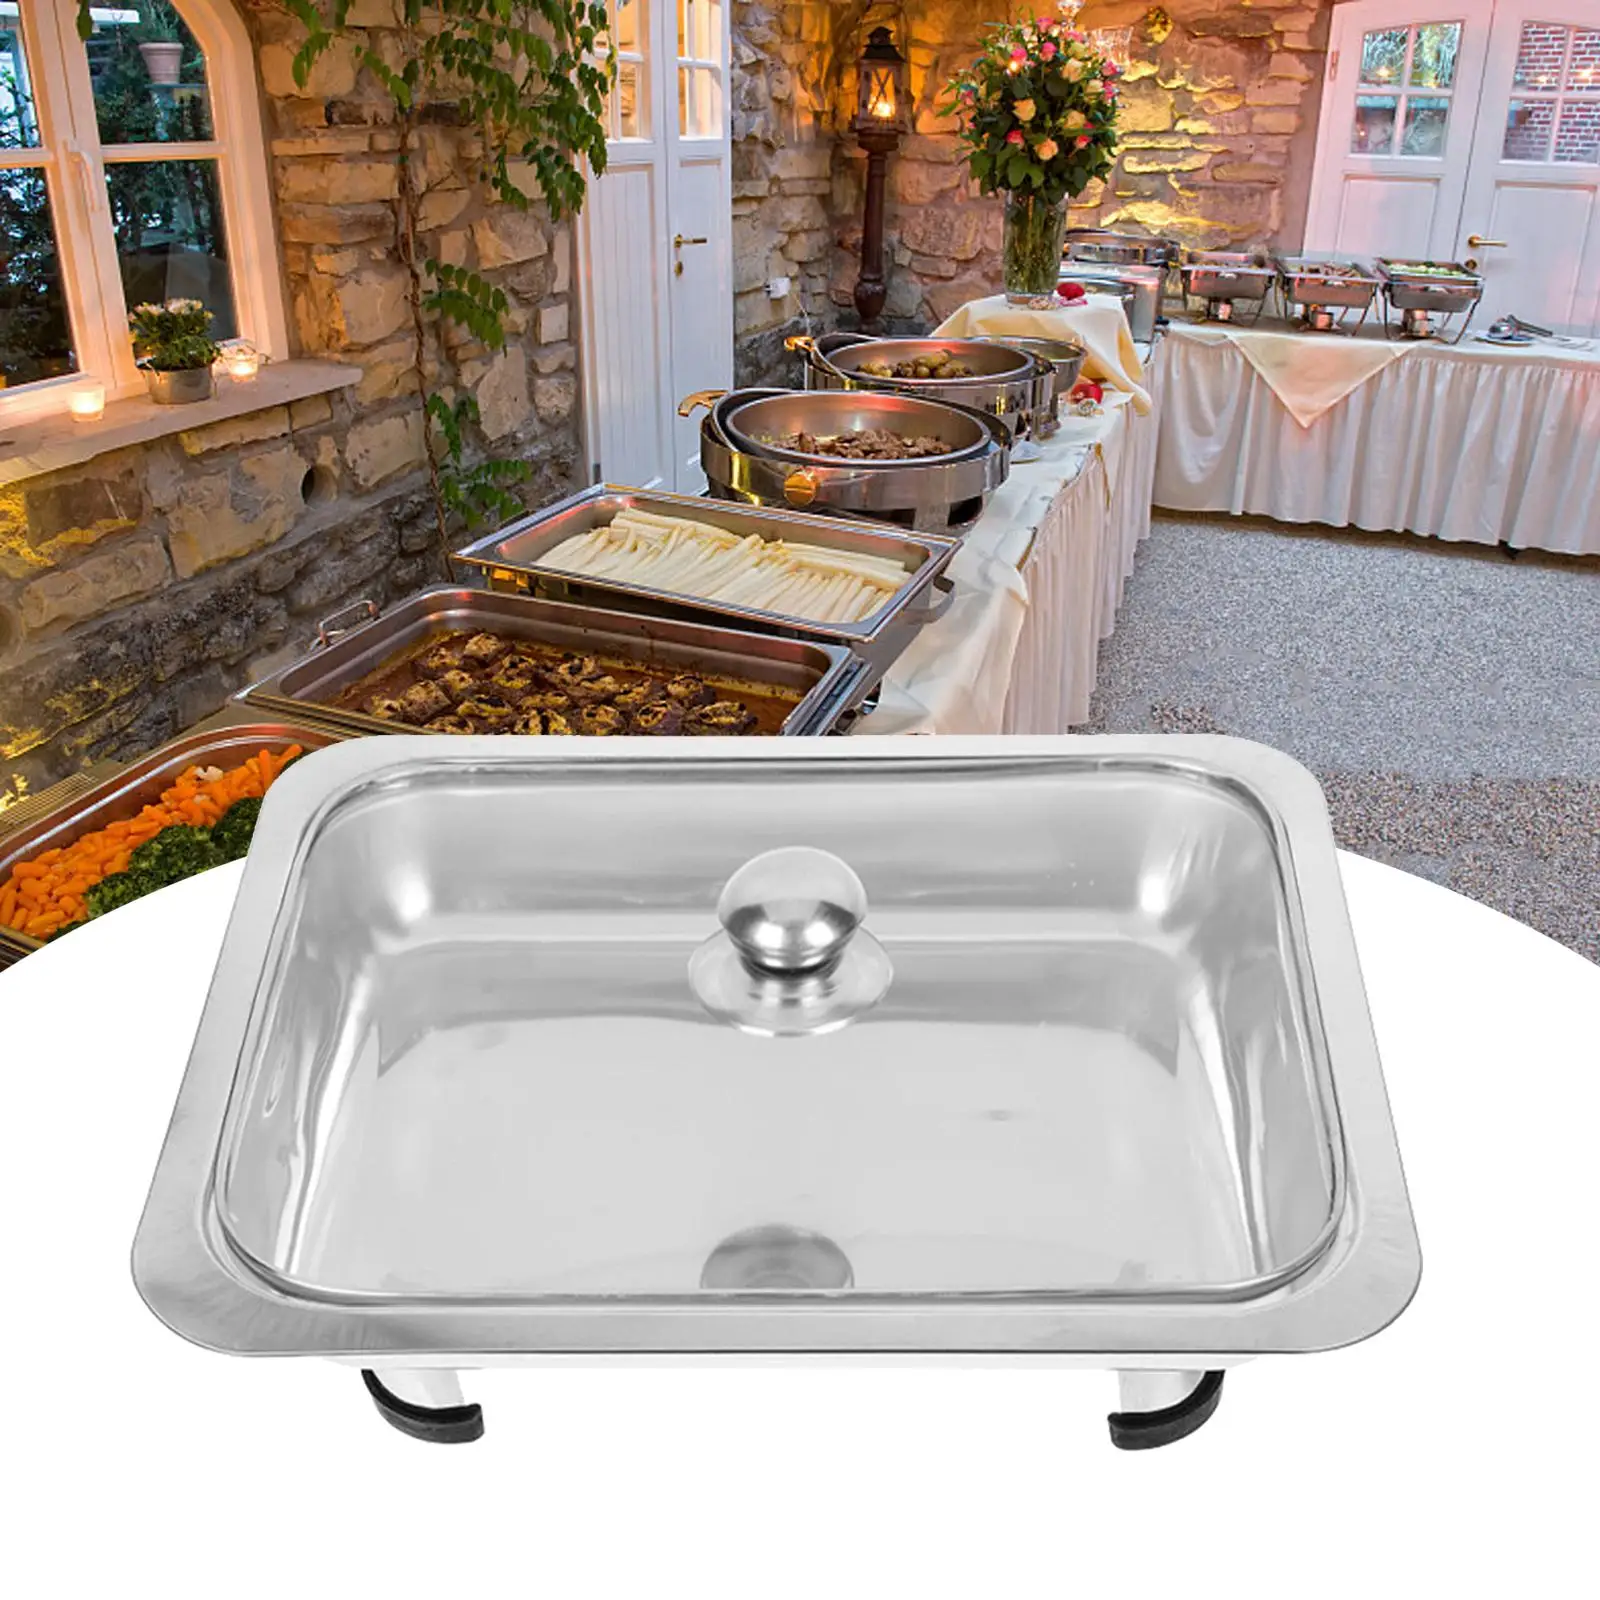 Buffet Dish Tray Buffet Server Warmer Easy to Clean Chafing Dish for Wedding Birthday Catering Events Holidays Parties